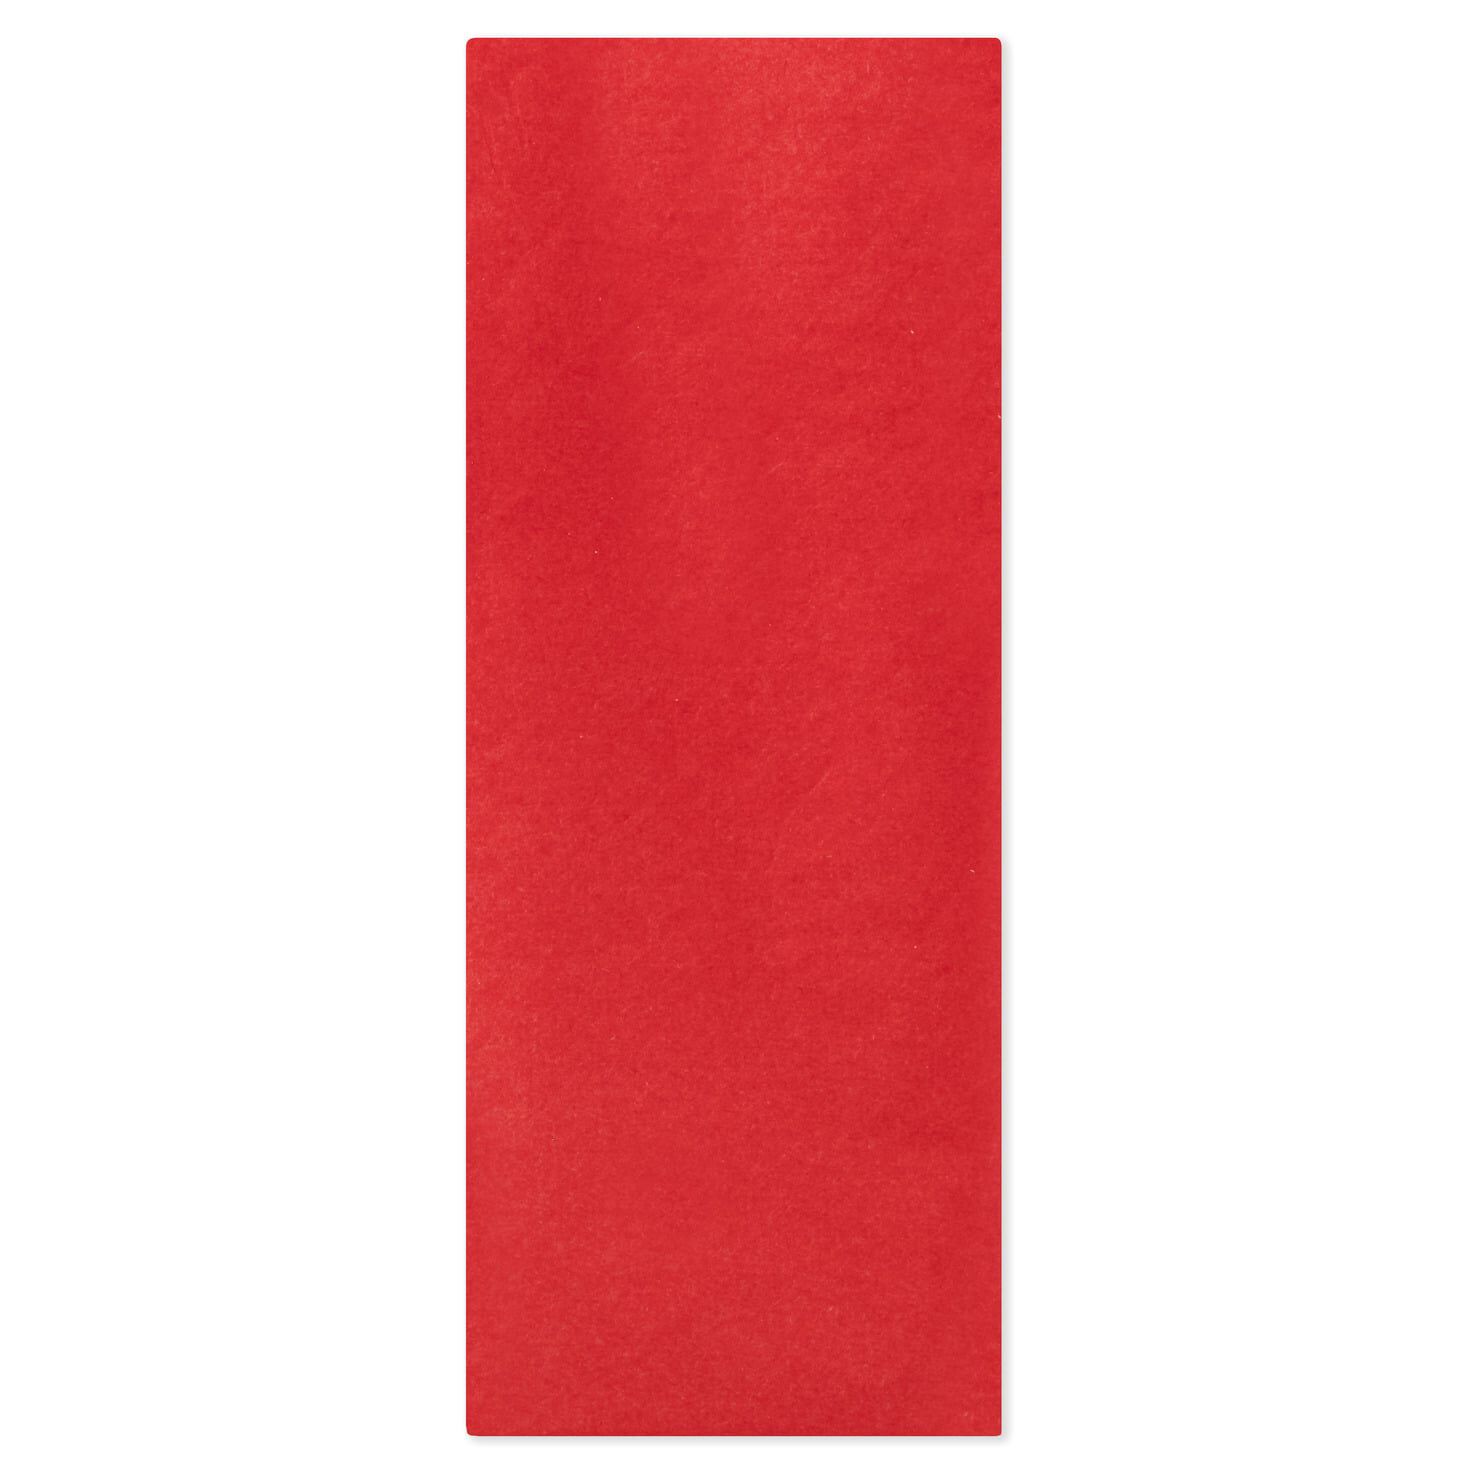 3 Packs of Red tissue 8 Sheets Per Pack 500 X 650mm 